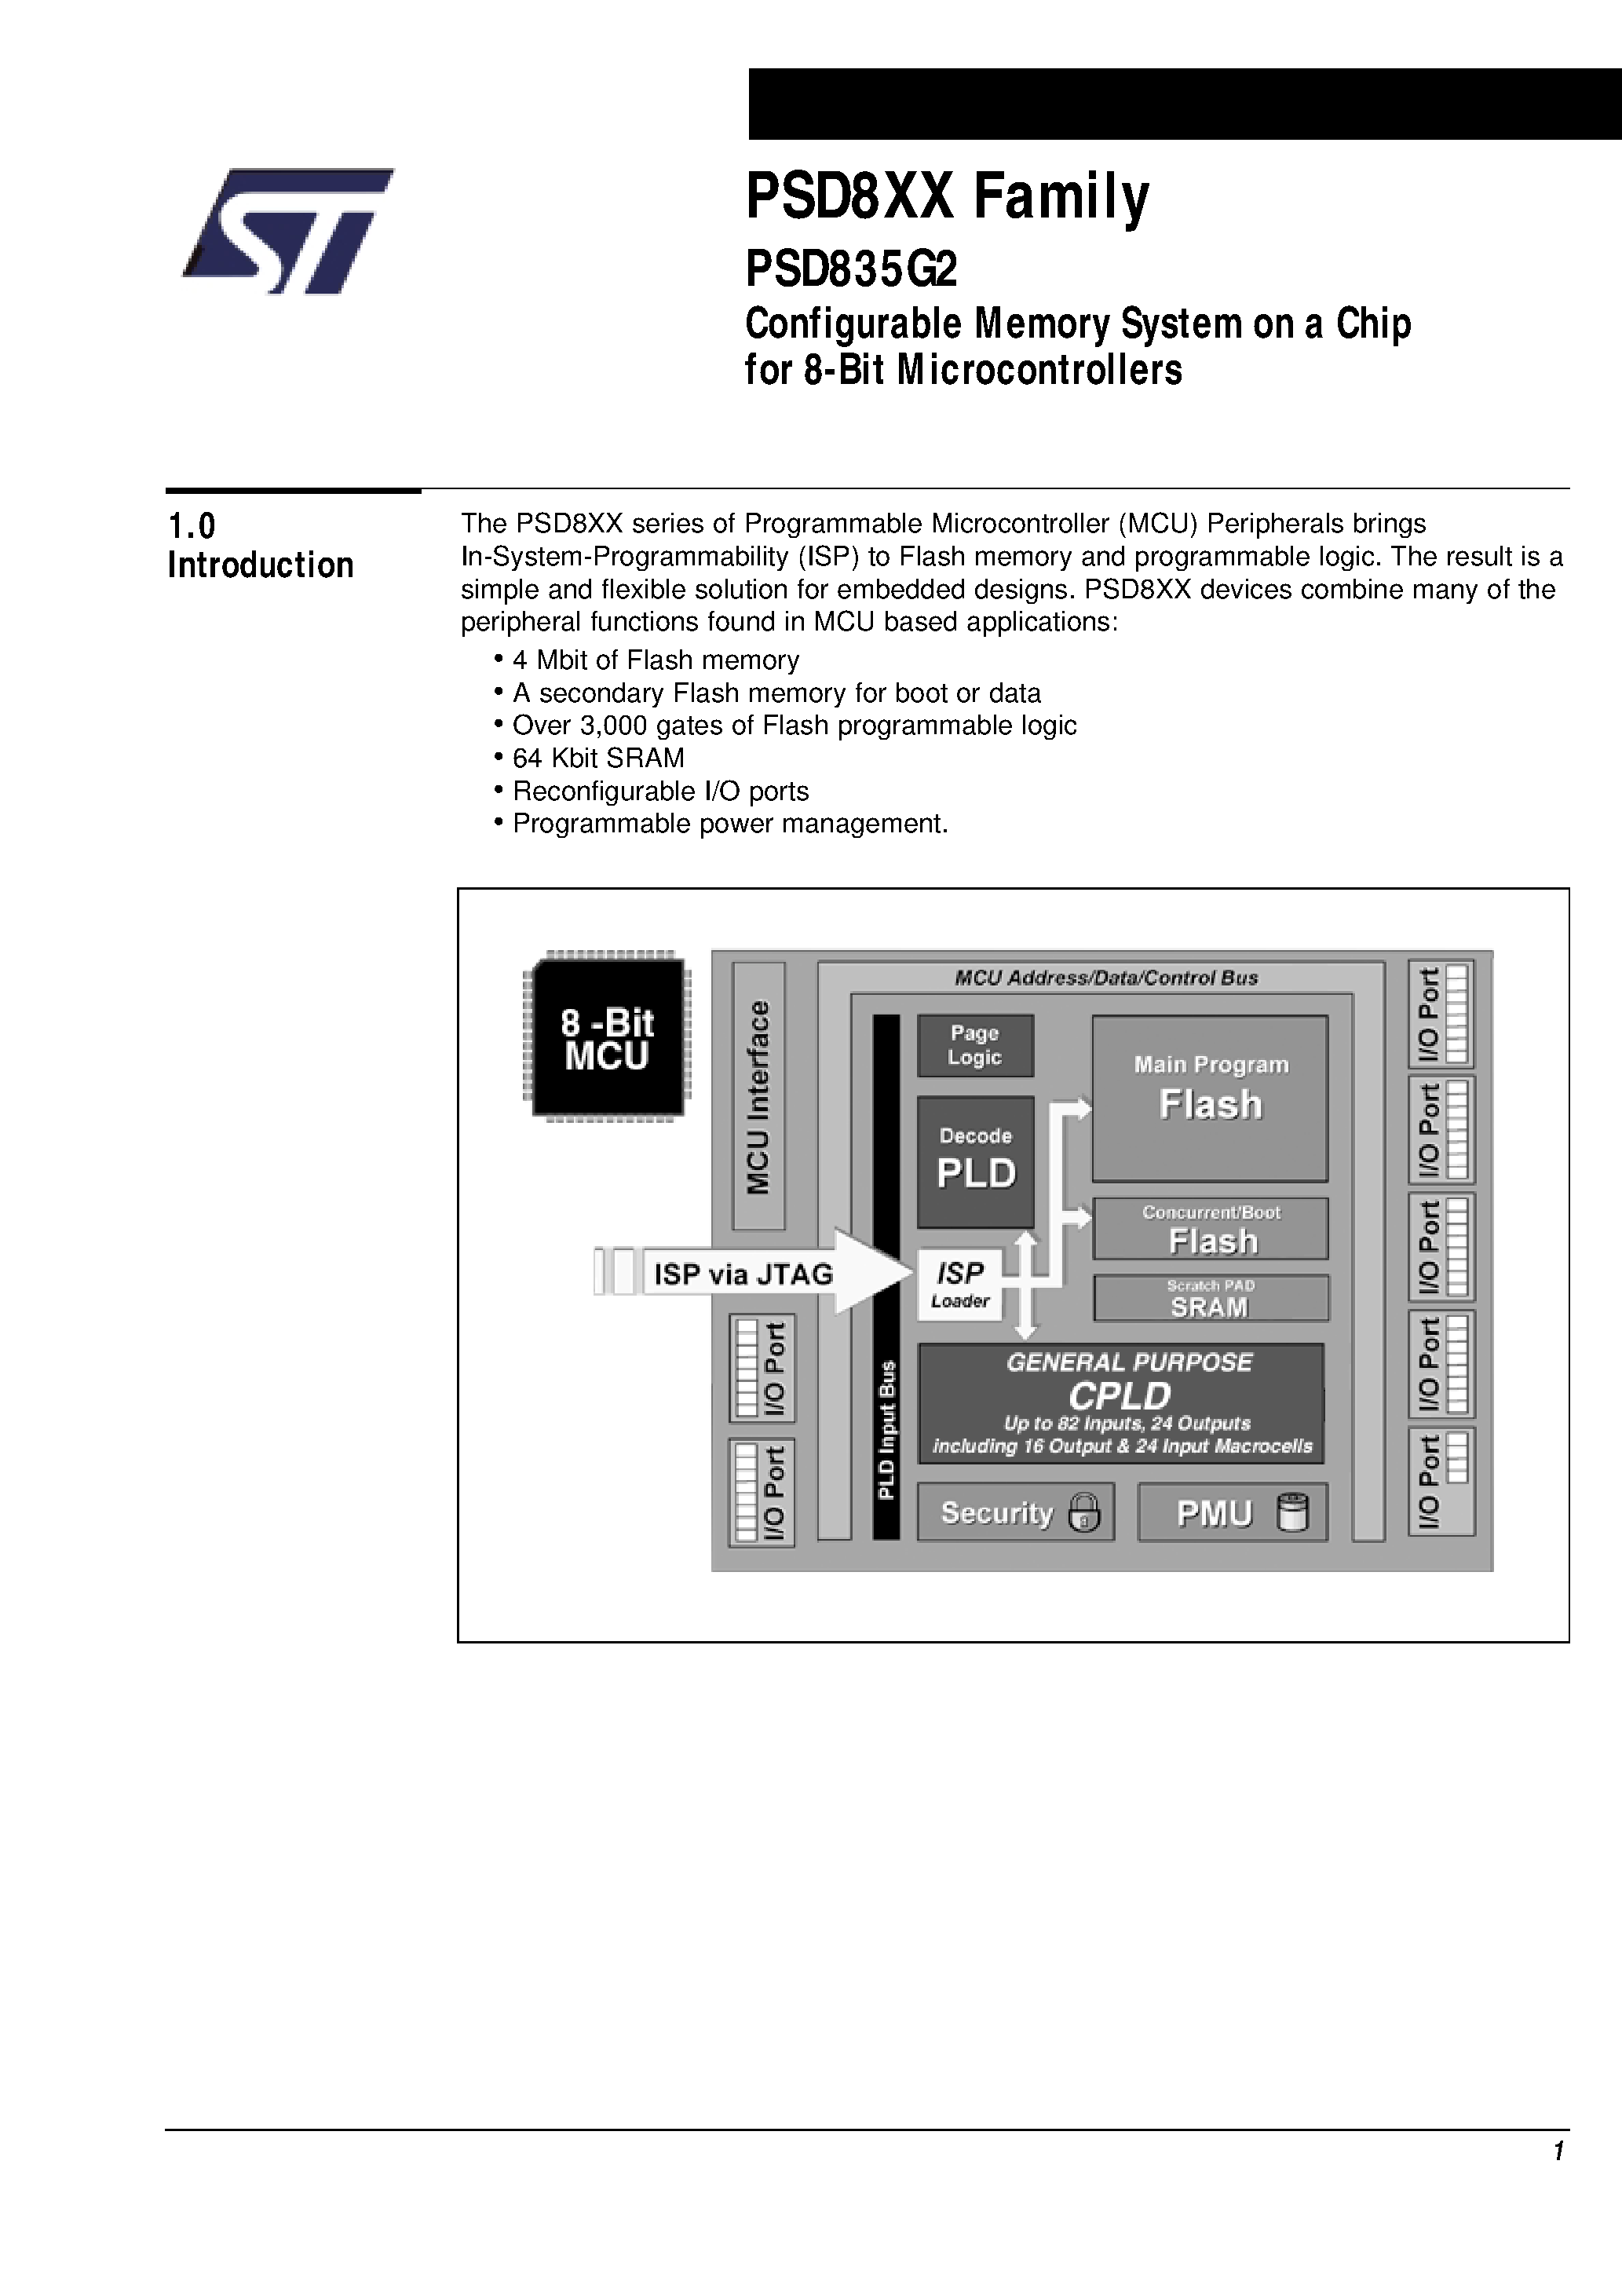 Datasheet PSD835F2-A-12MI - Configurable Memory System on a Chip for 8-Bit Microcontrollers page 2